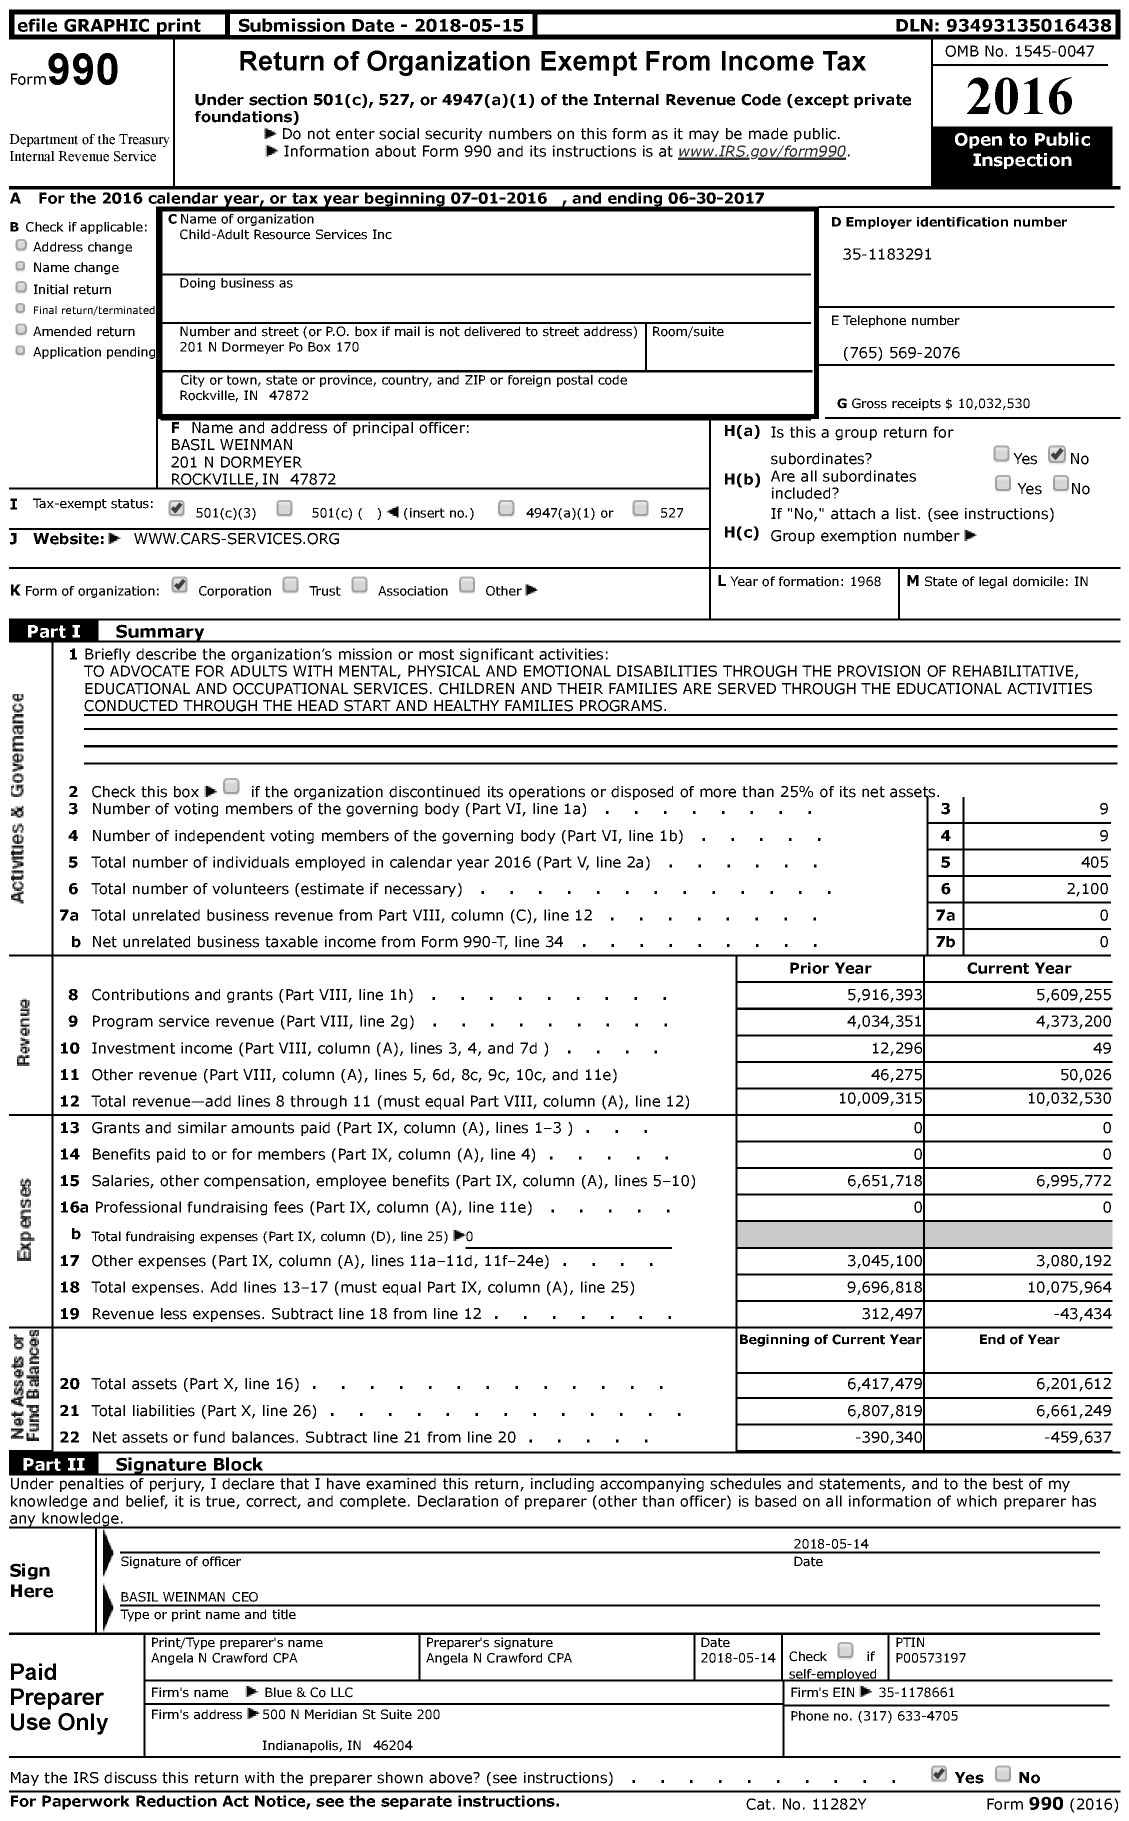 Image of first page of 2016 Form 990 for Child-Adult Resource Services